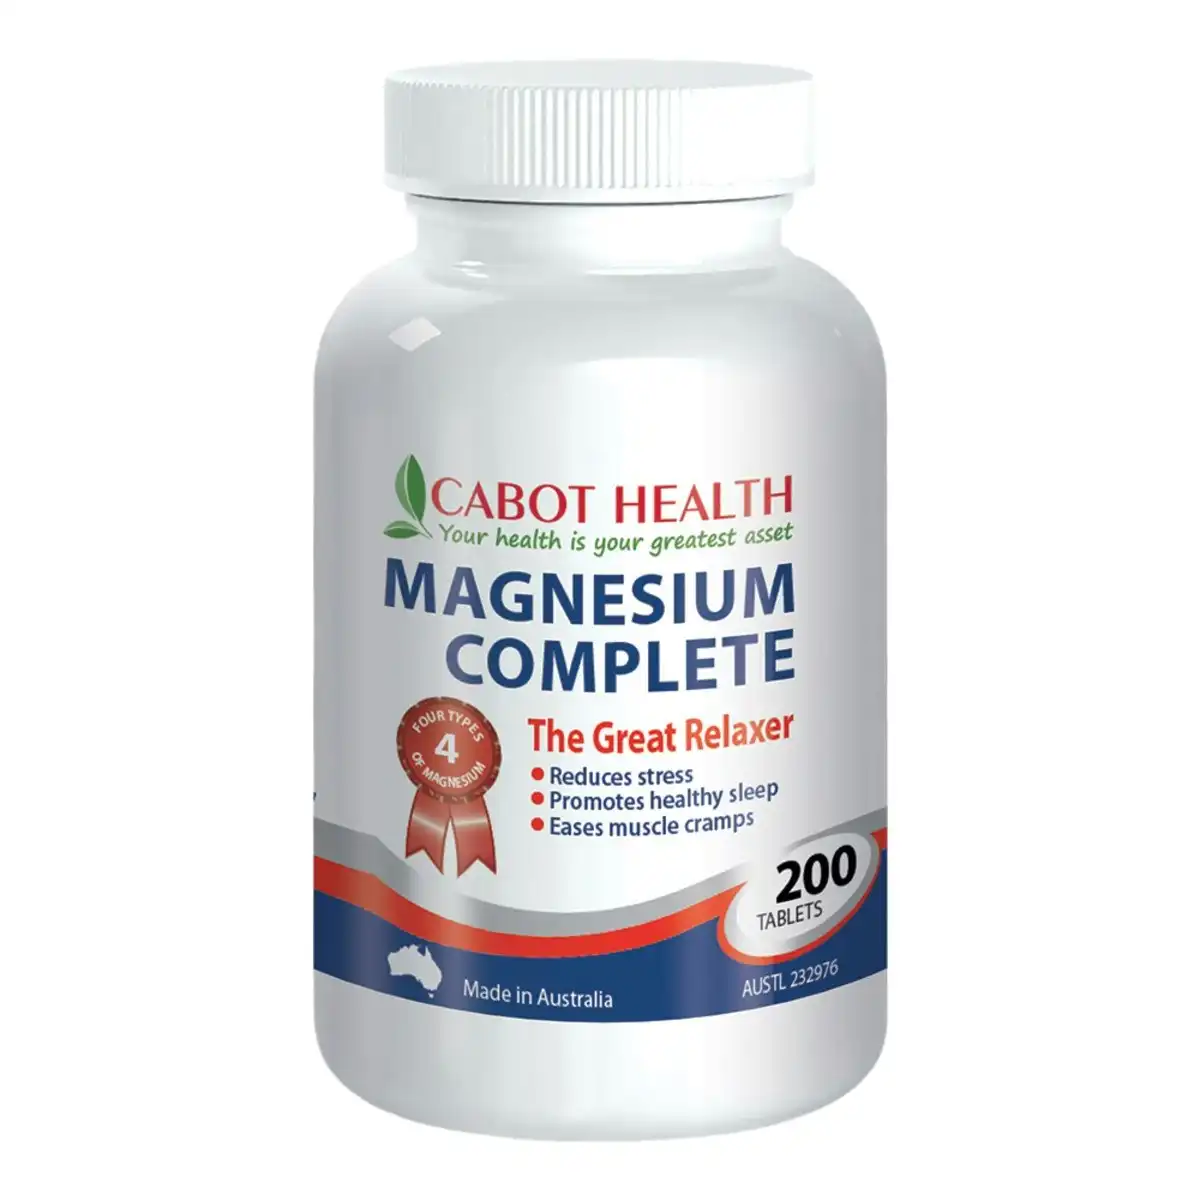 Cabot Health Magnesium Complete Tablets 200